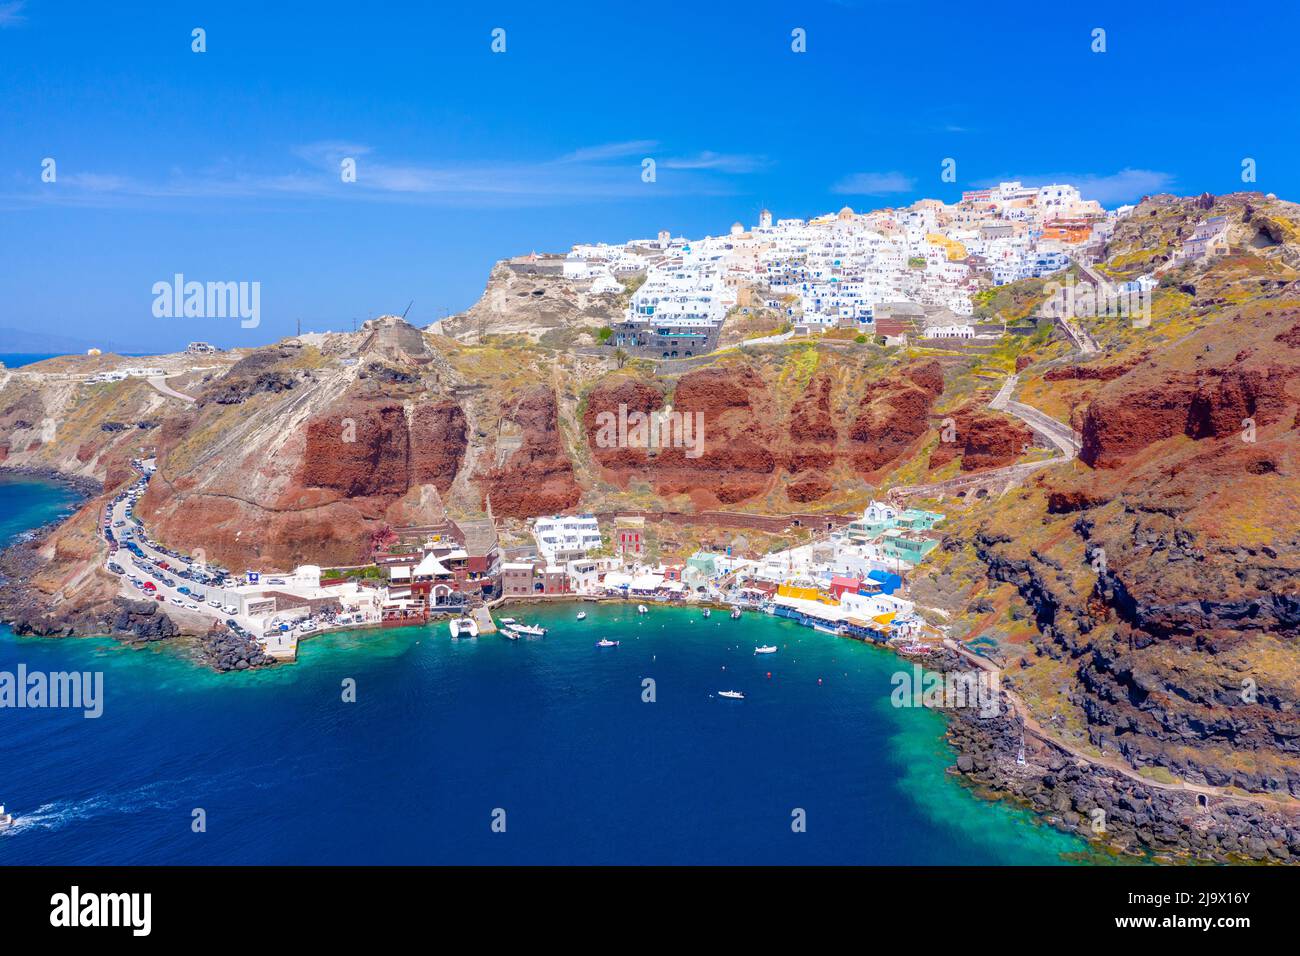 The old harbor of Ammoudi under the famous village of Oia at Santorini, Greece. Stock Photo